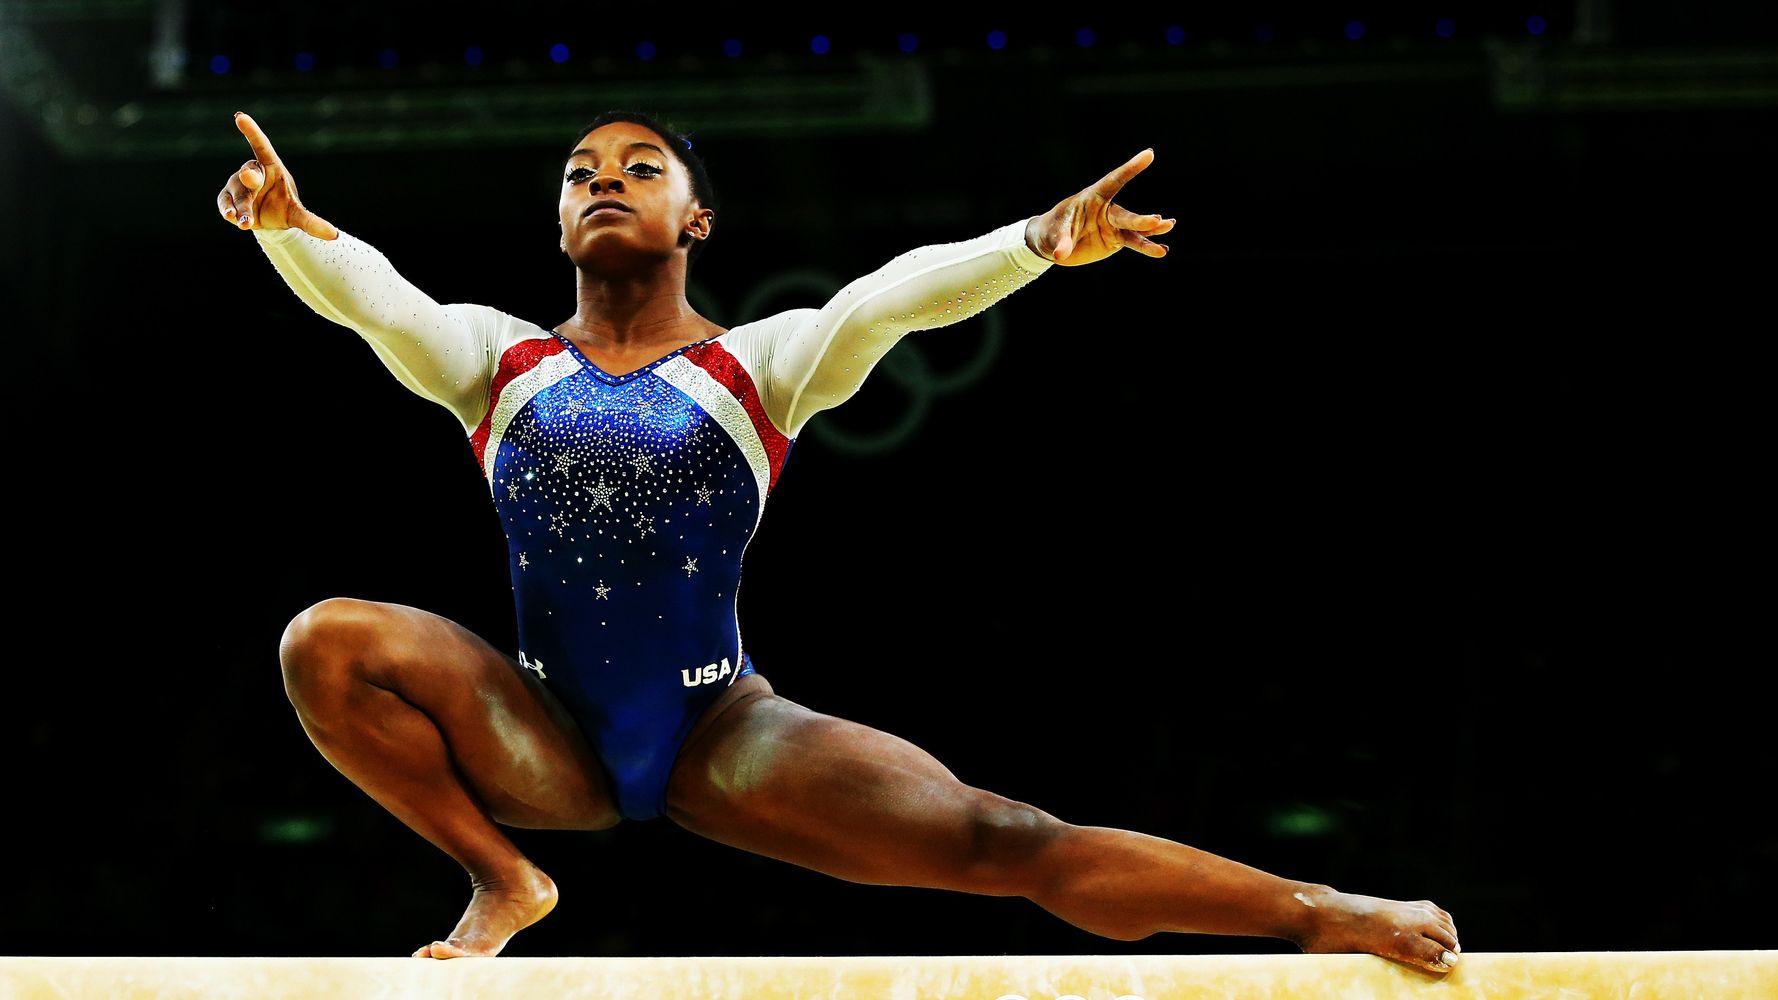 Why The U.S. Gymnasts' Leotards Cost More Than Your Entire Wardrobe